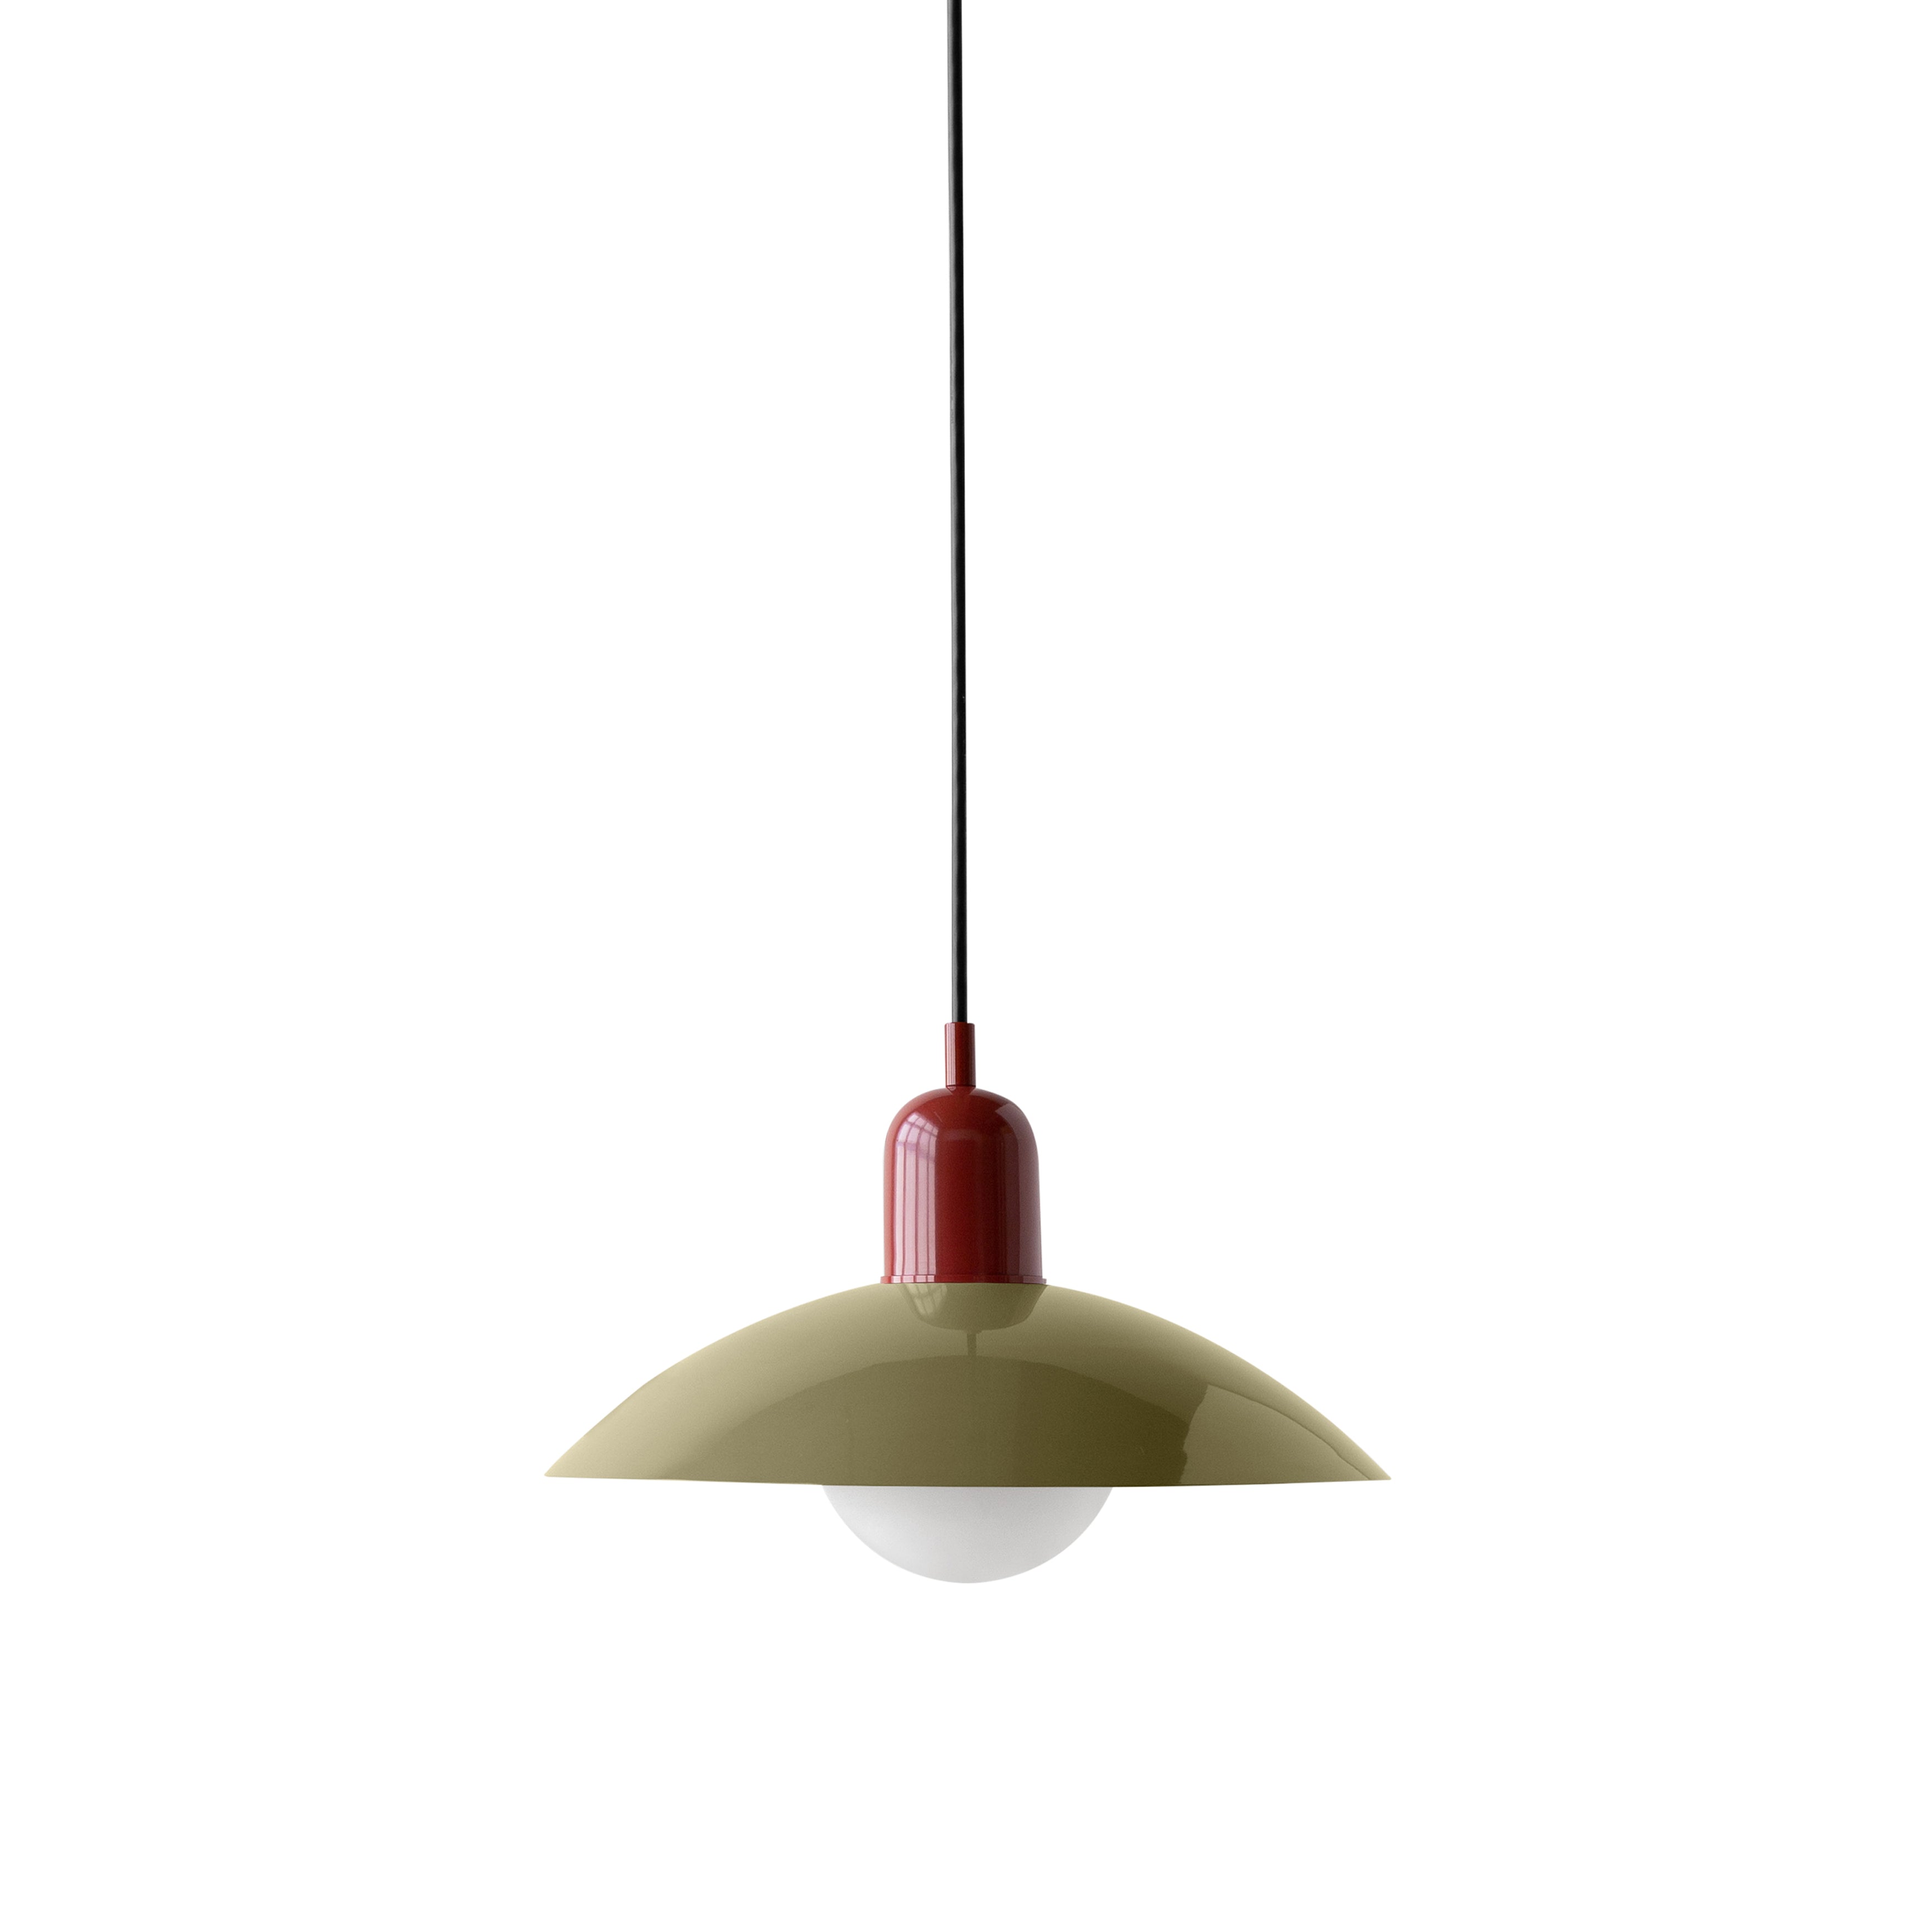 Arundel Orb Pendant: Reed Green + Oxide Red